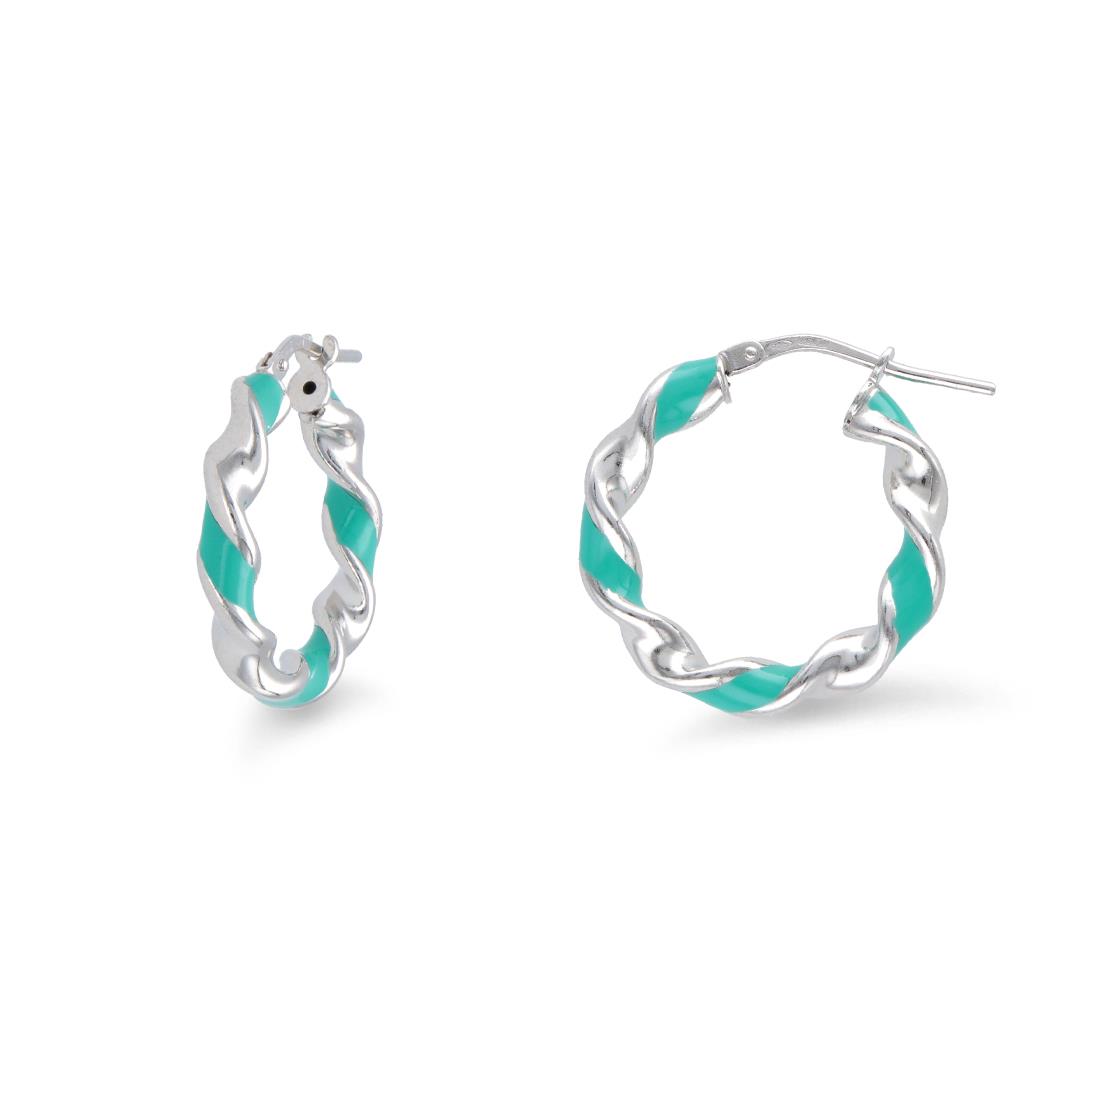 Hula Hoop collection torchon hoop earrings in rhodium-plated 925 silver with green enamel - LUXURY MILANO